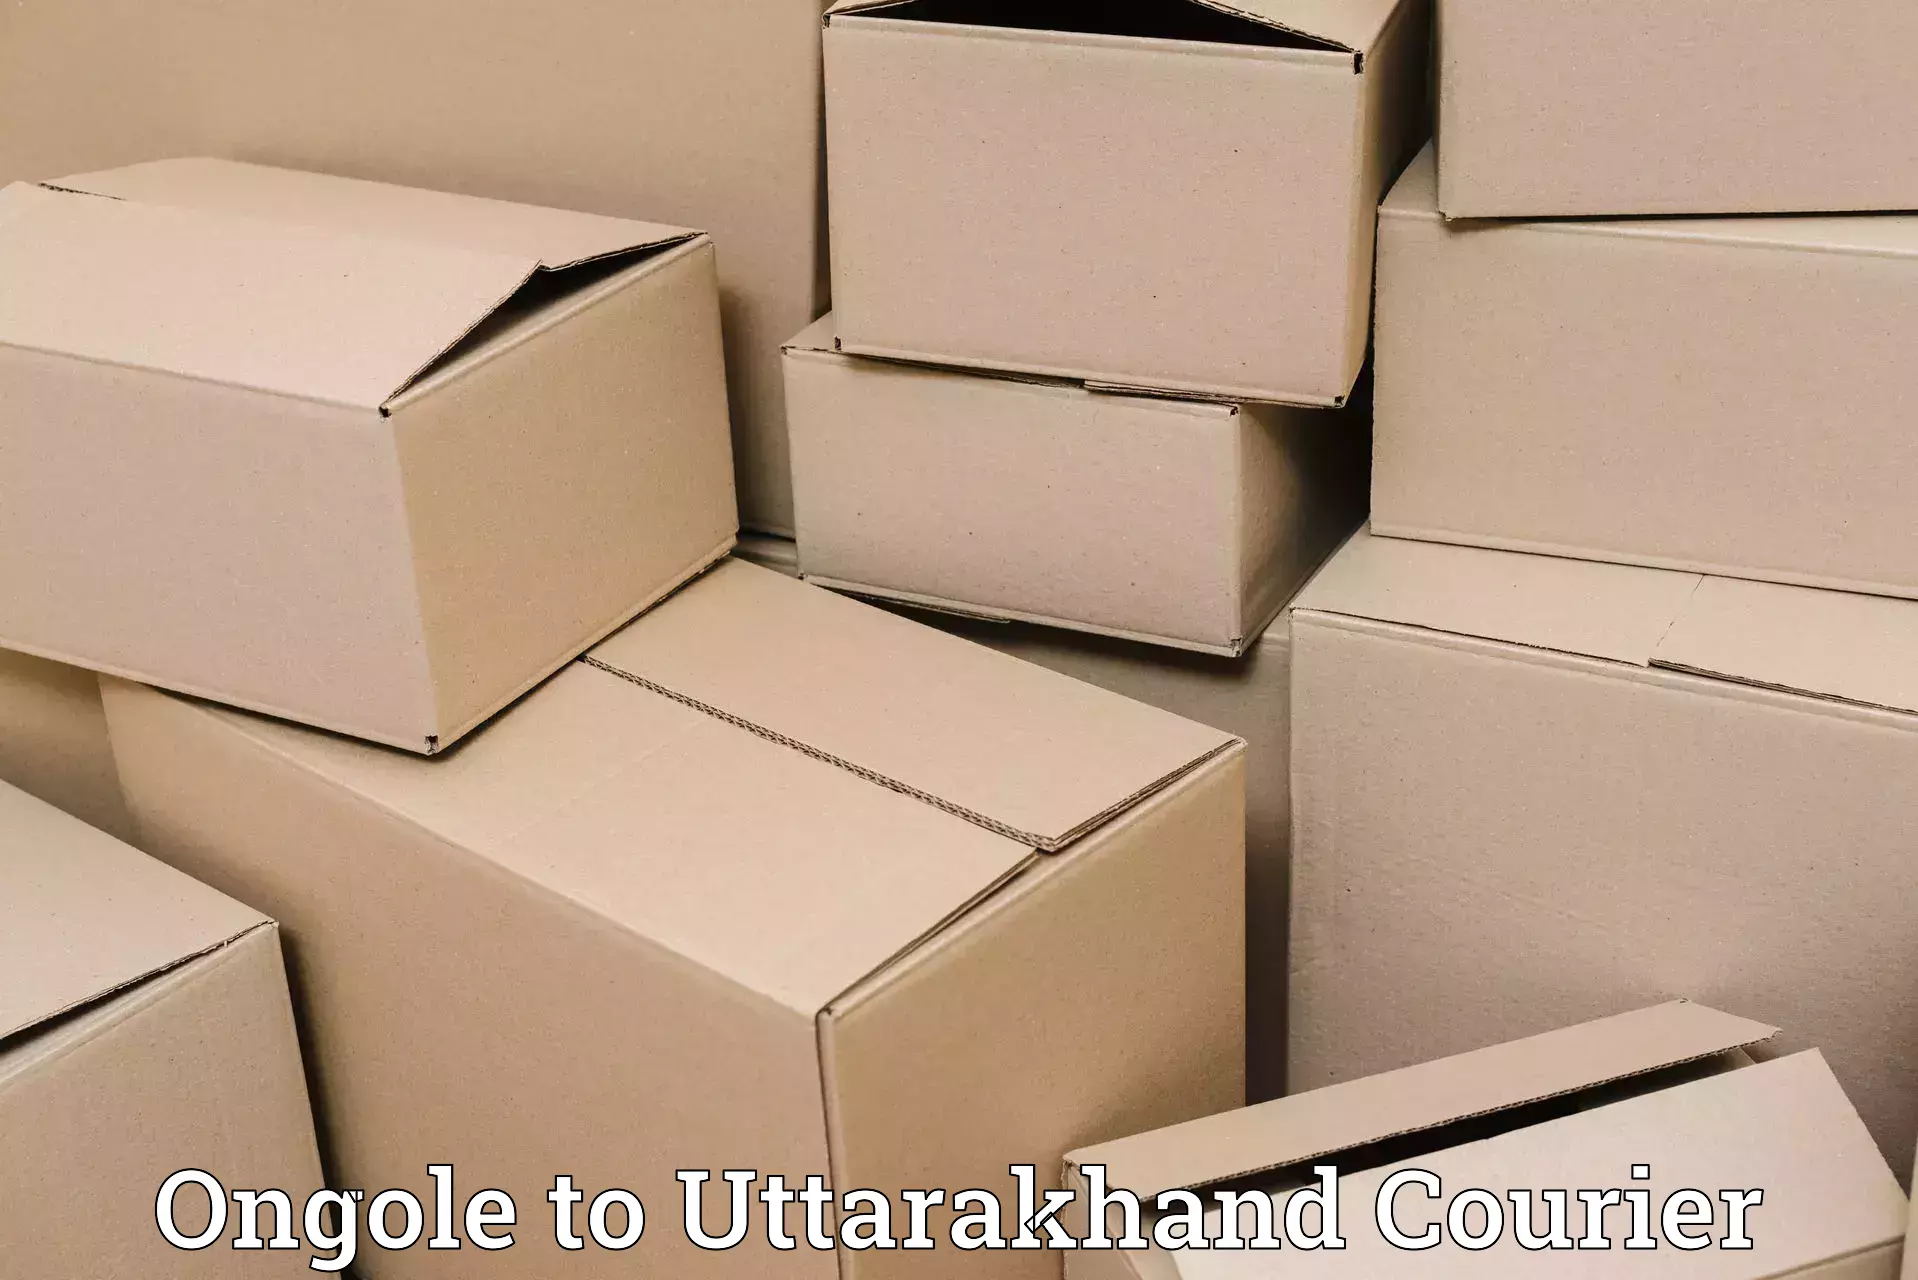 Corporate courier solutions Ongole to IIT Roorkee